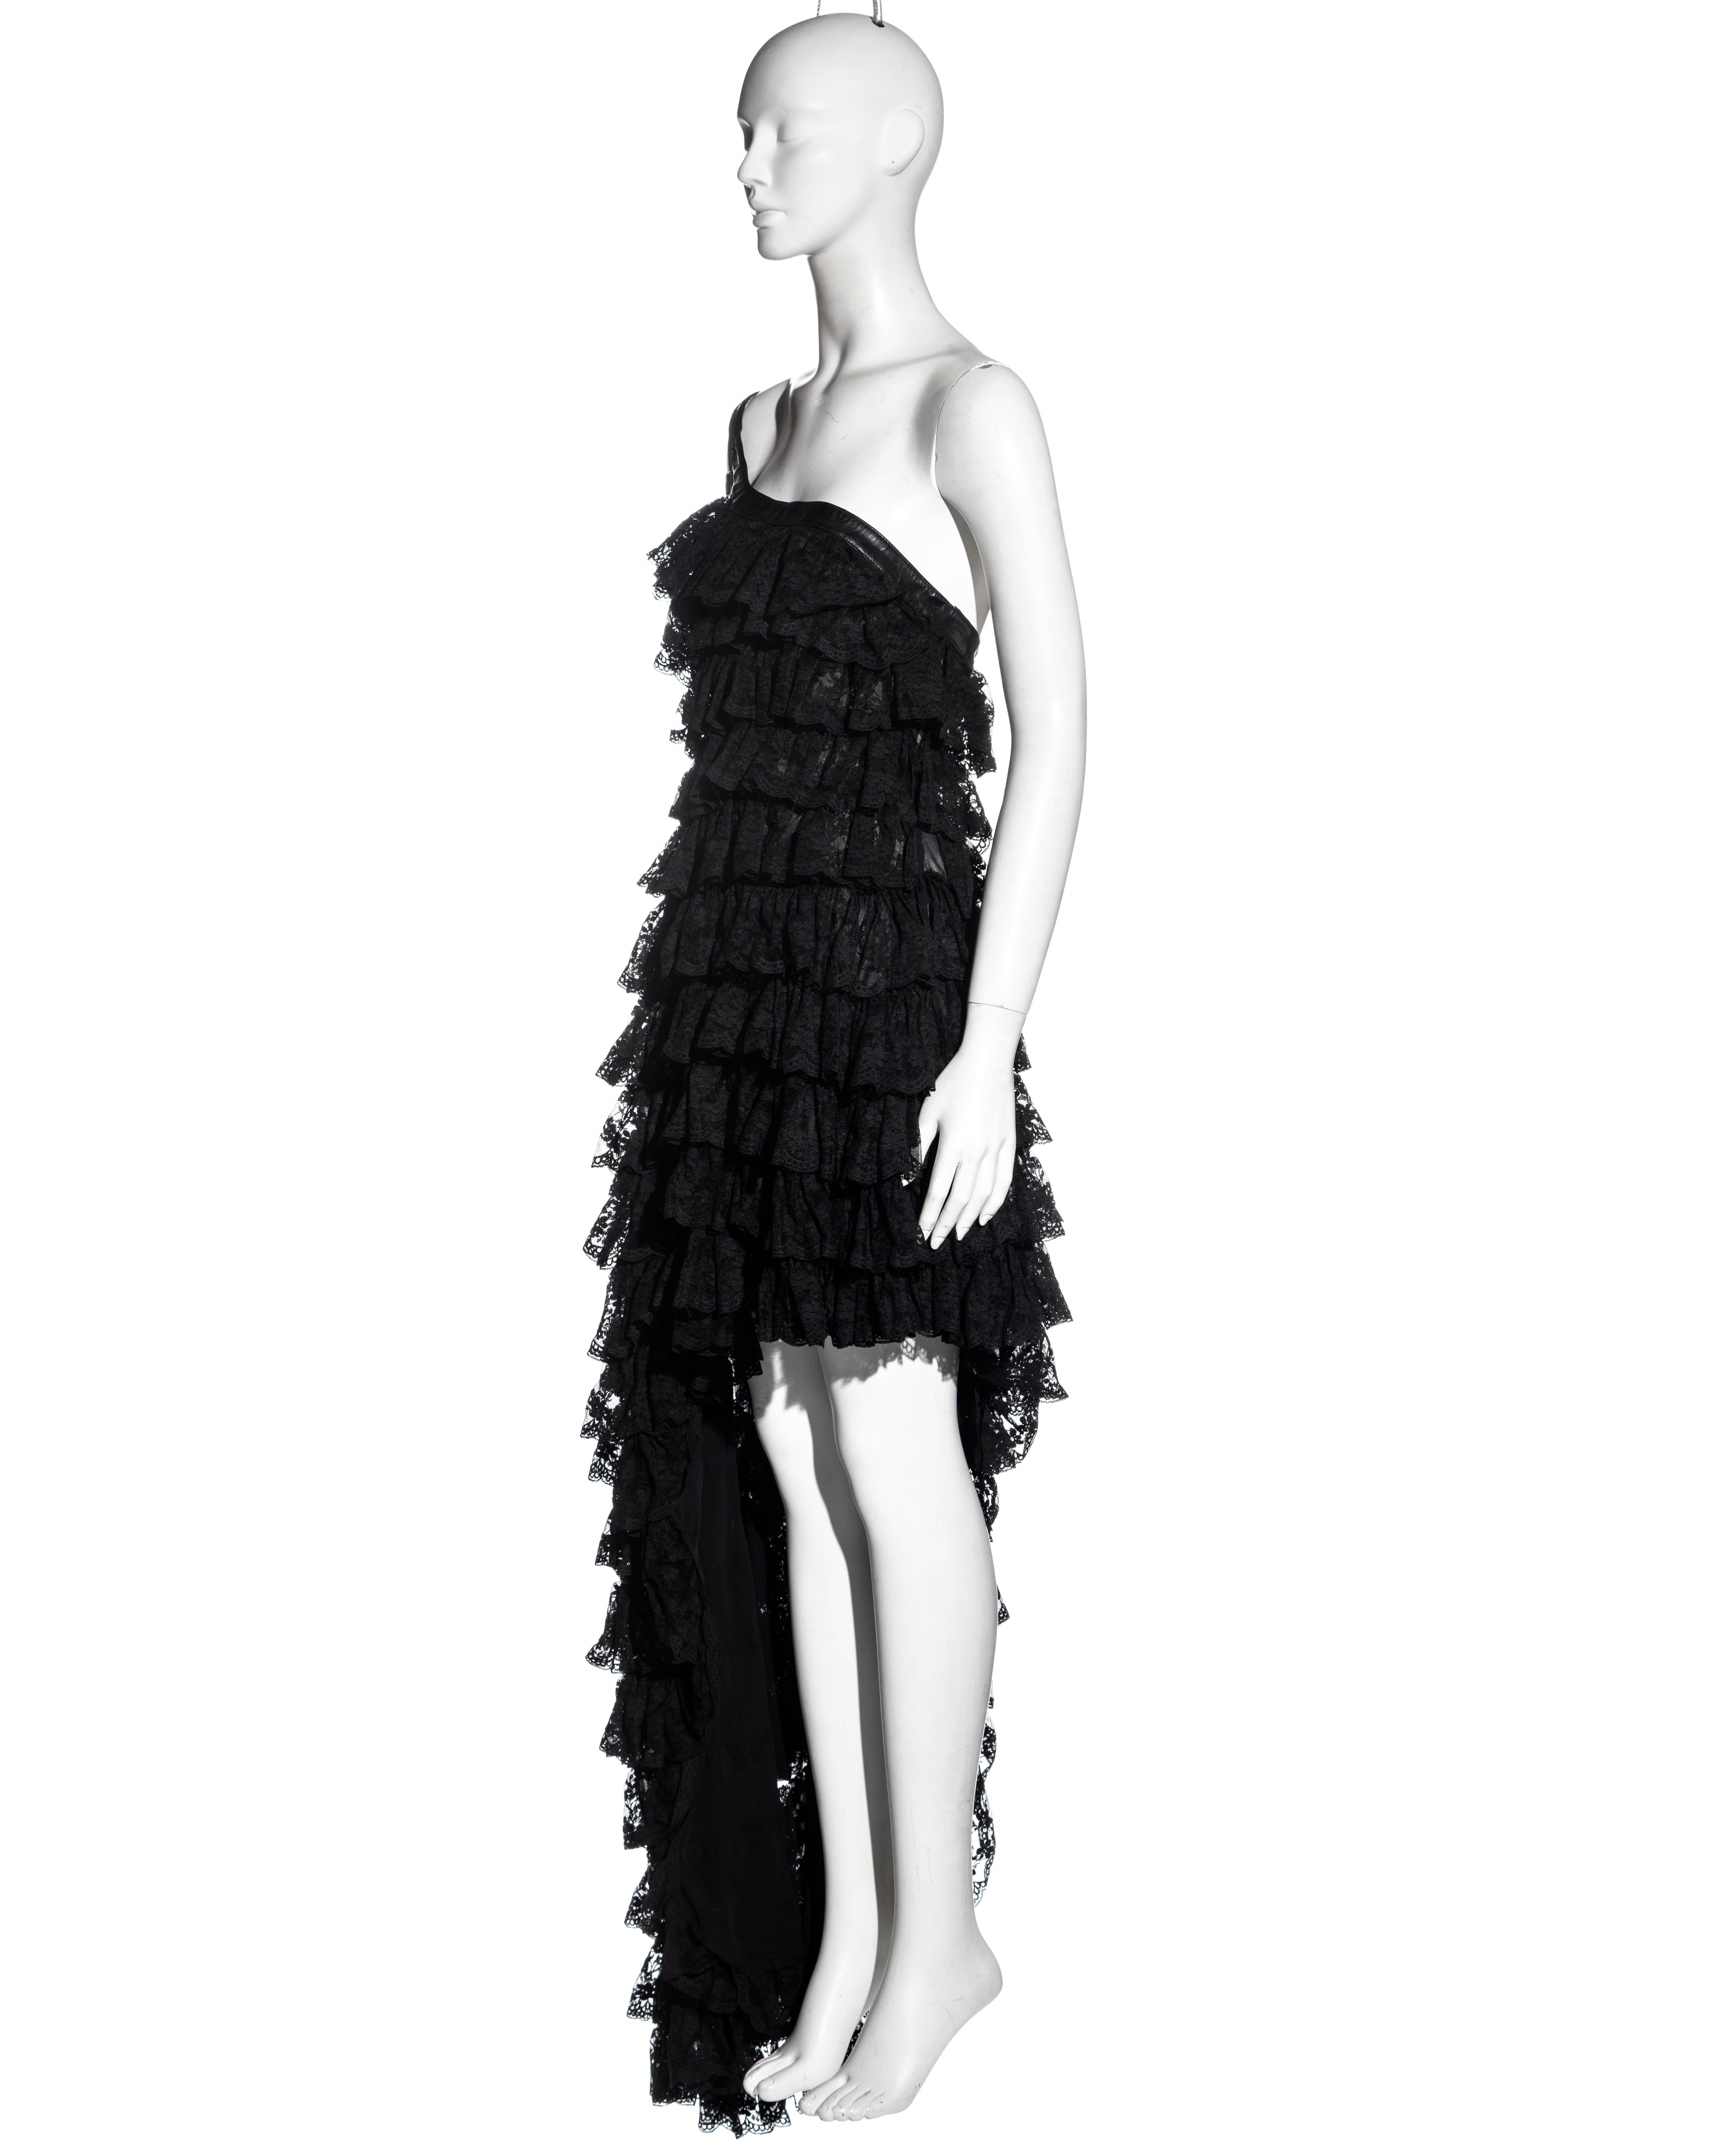 Alexander McQueen black lace and leather evening dress, ss 1999 2